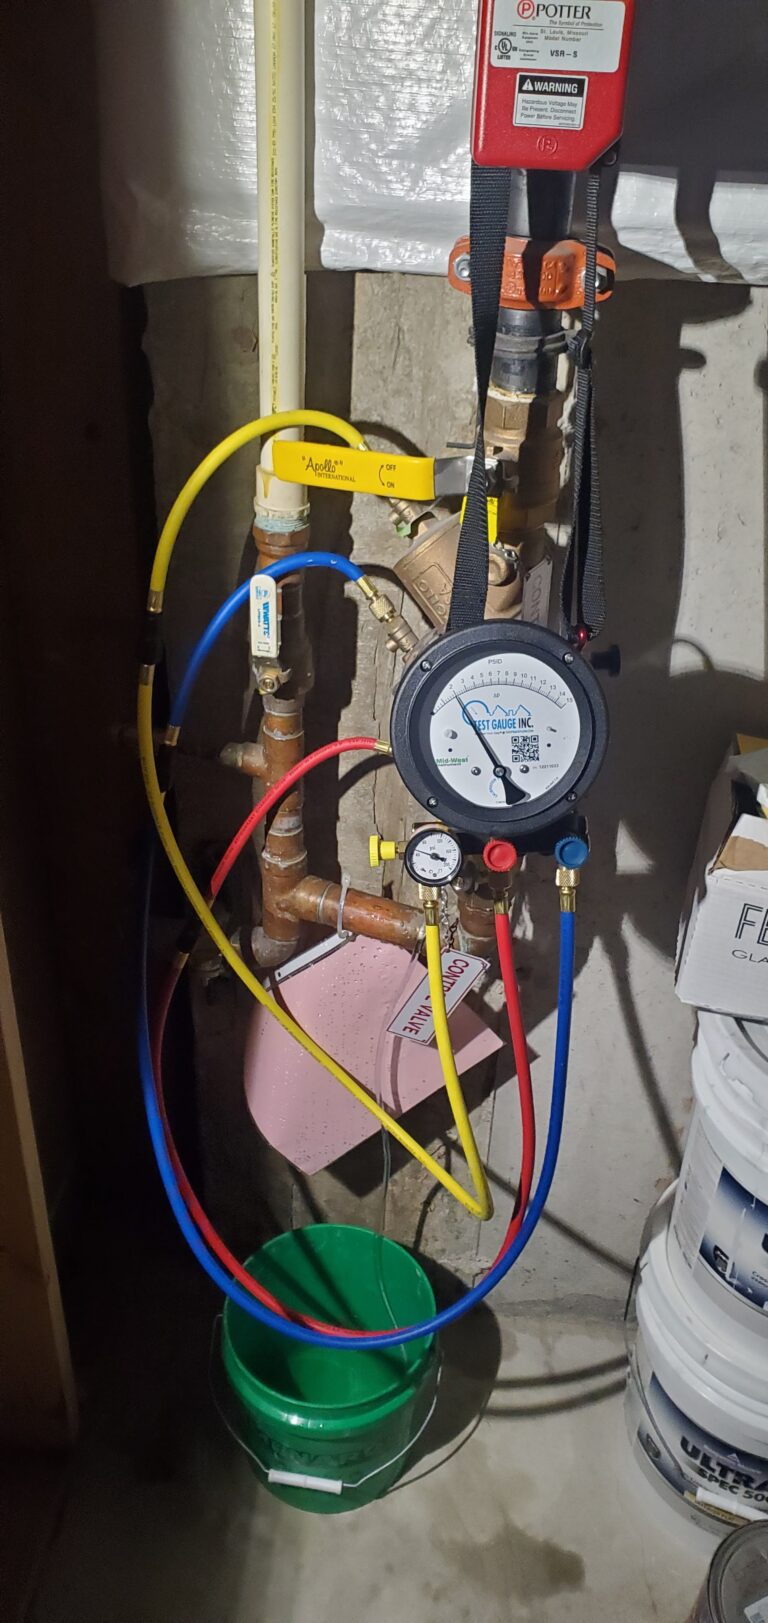 Installed backflow prevention device for backflow testing